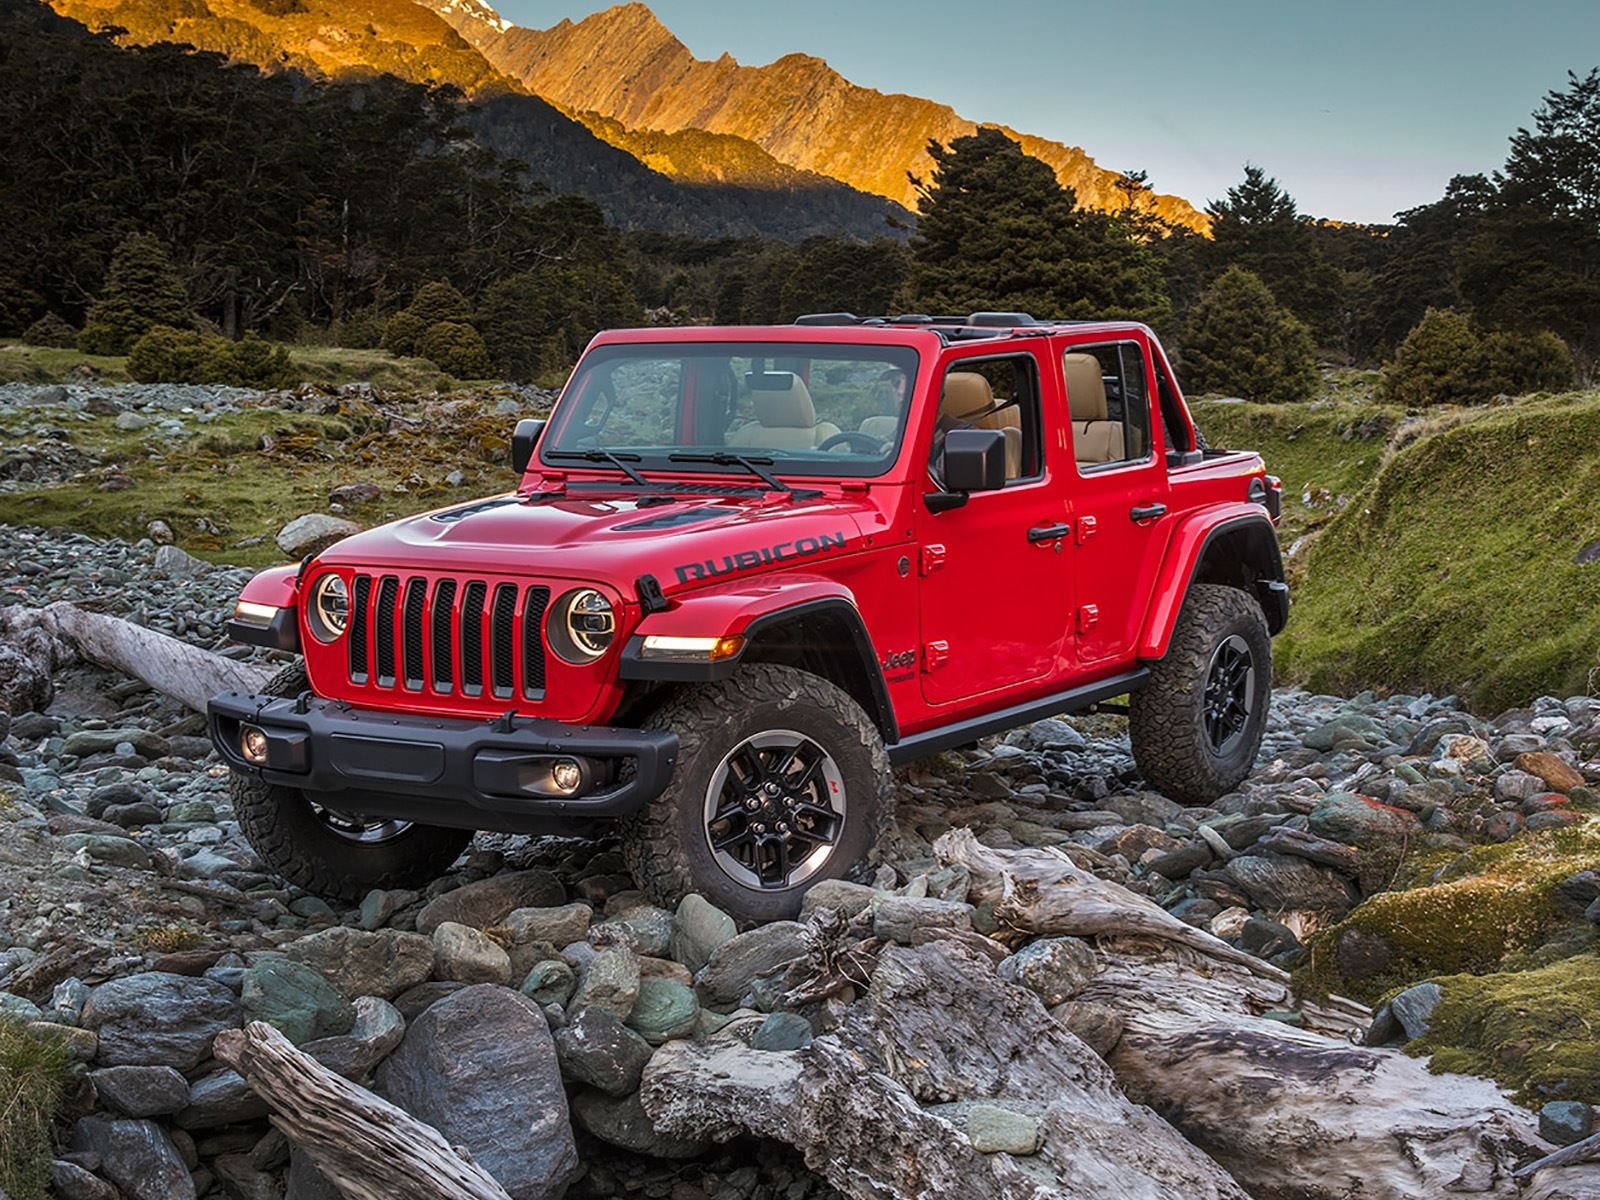 The Most Expensive 2018 Jeep Wrangler Costs Nearly $60,000 | CarBuzz